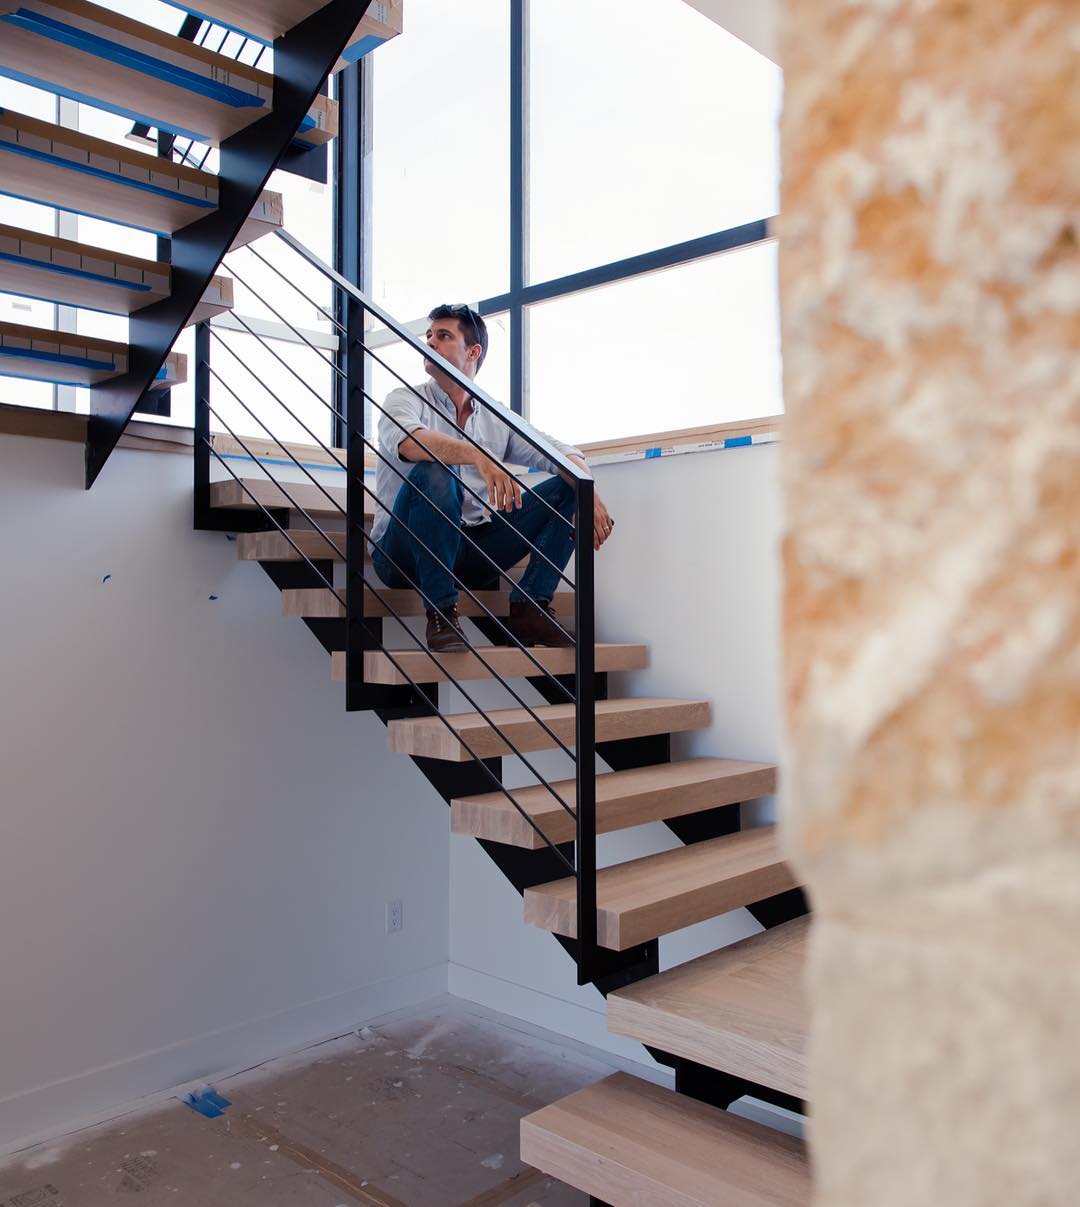 Contemplation of design with Breck Craparo on our latest stair install. Built by @foursquarebuilders & @austin_iron & @ingrainedbynature Designed by @dc_architecture Photo by @redpantsstudio